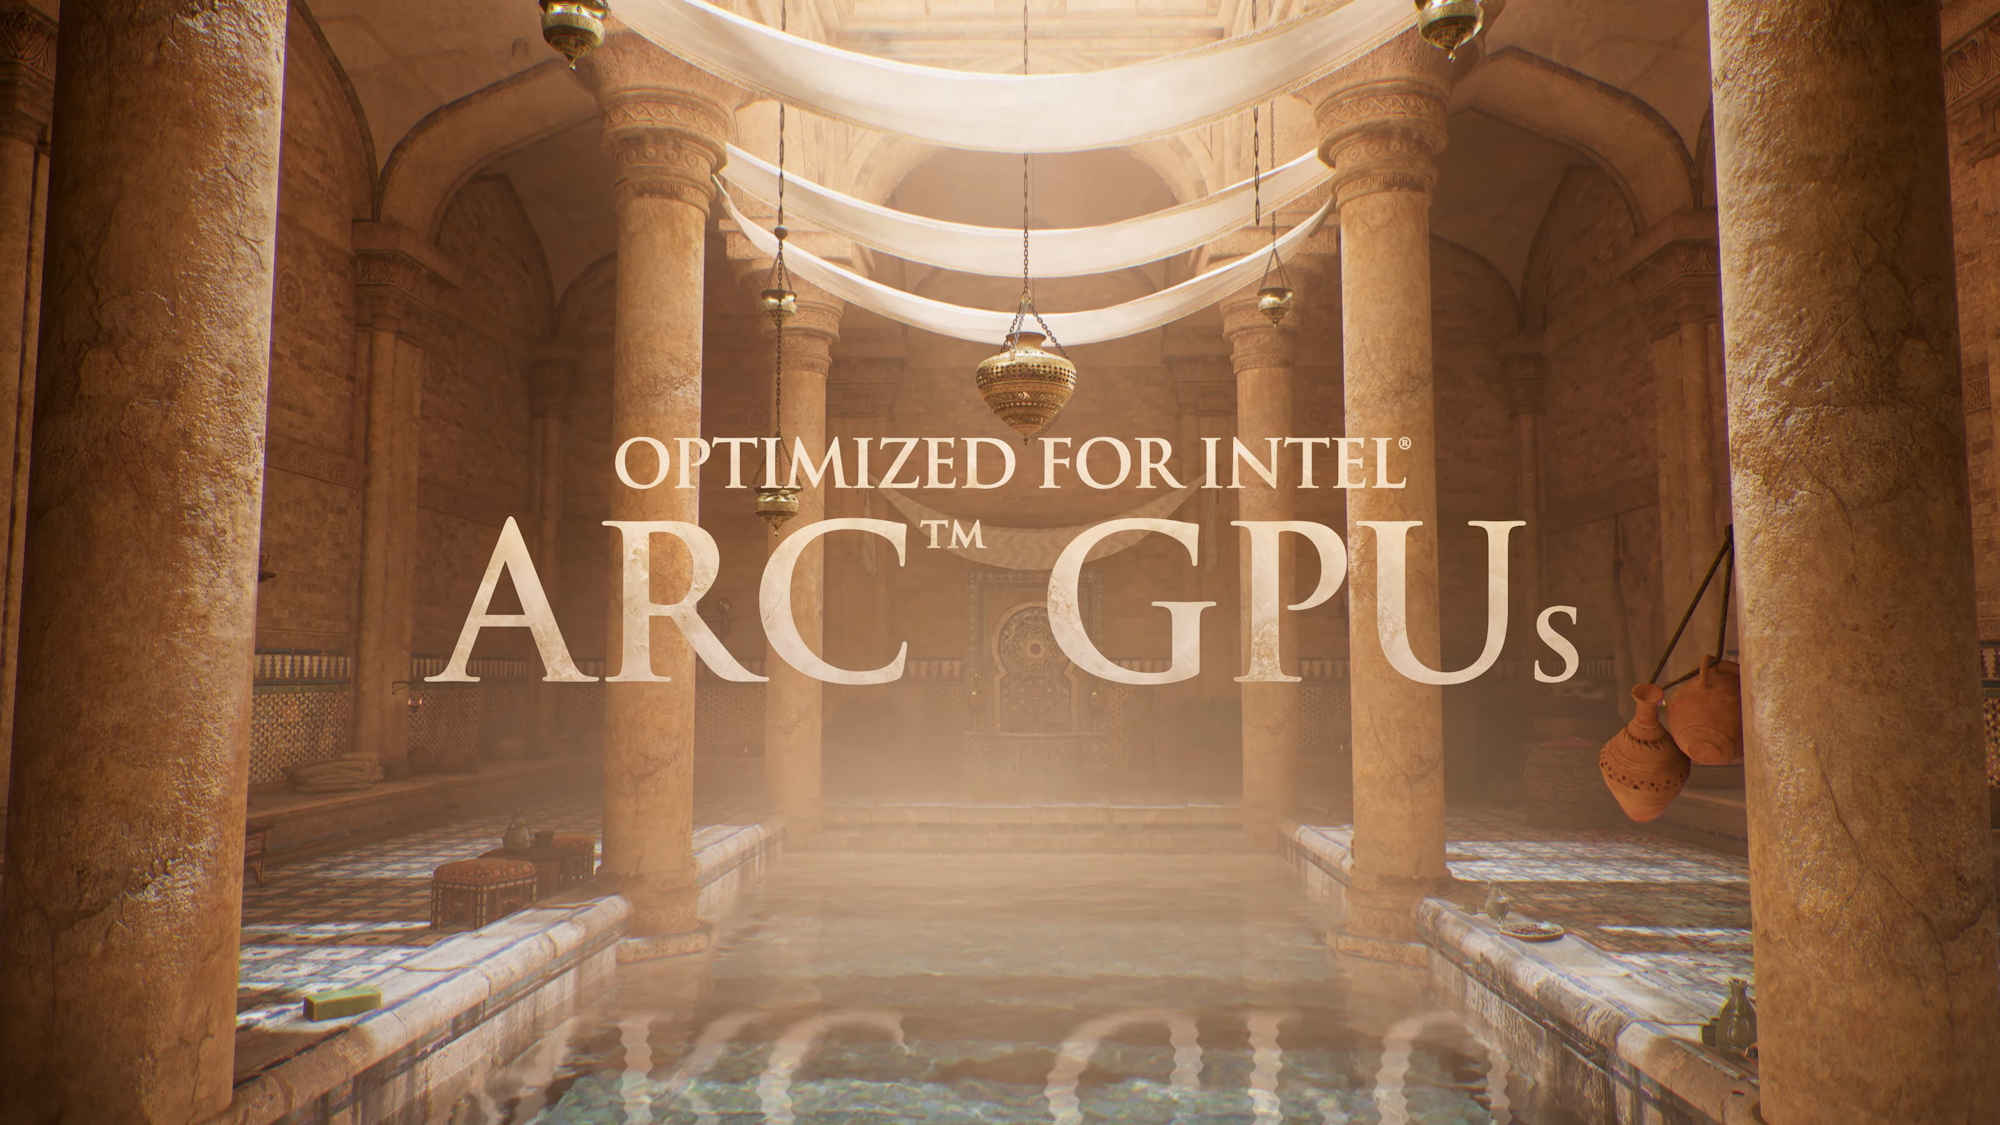 Assassin's Creed Mirage PC System Requirements Announced Ahead of